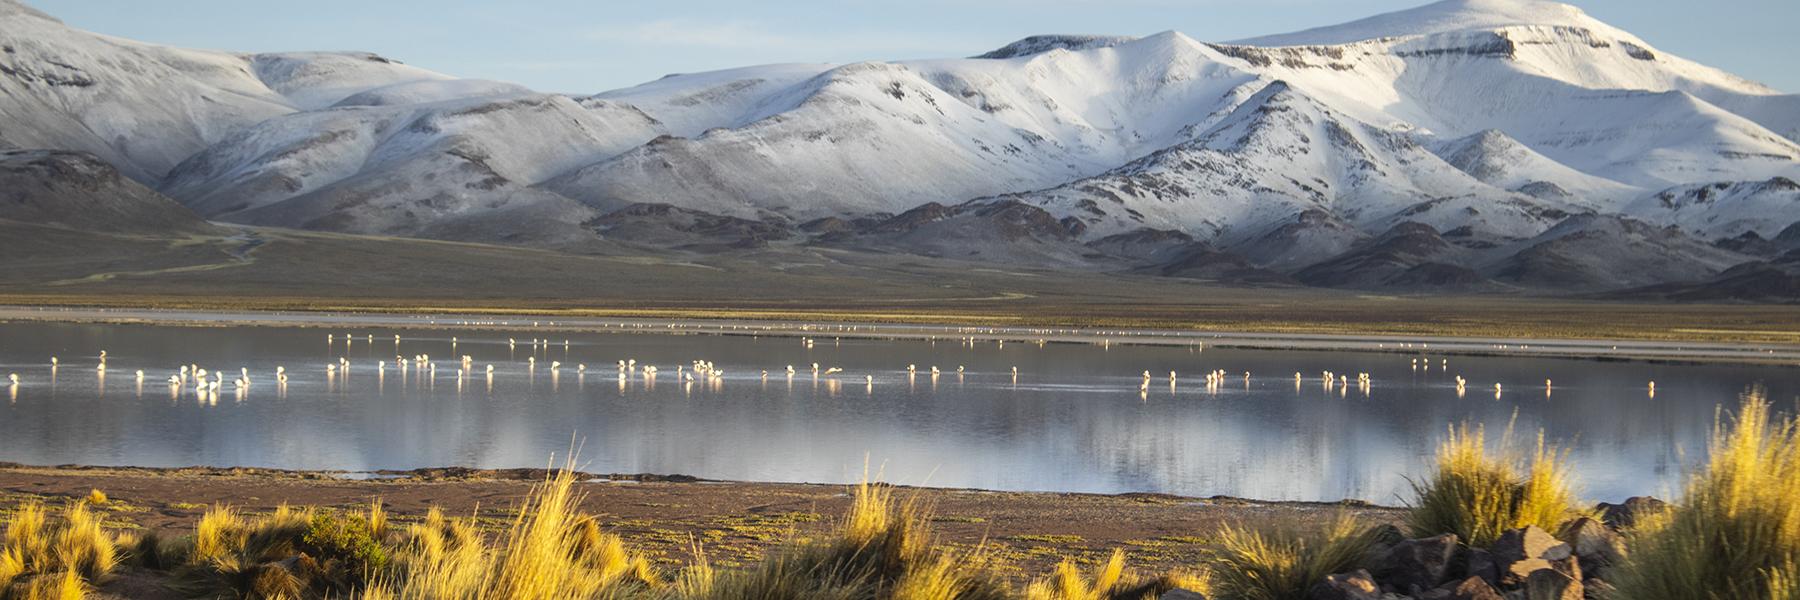 More than 100 flamingos wade in Lake Vilama. Snow-covered Andes Mountains and blue sky in background.